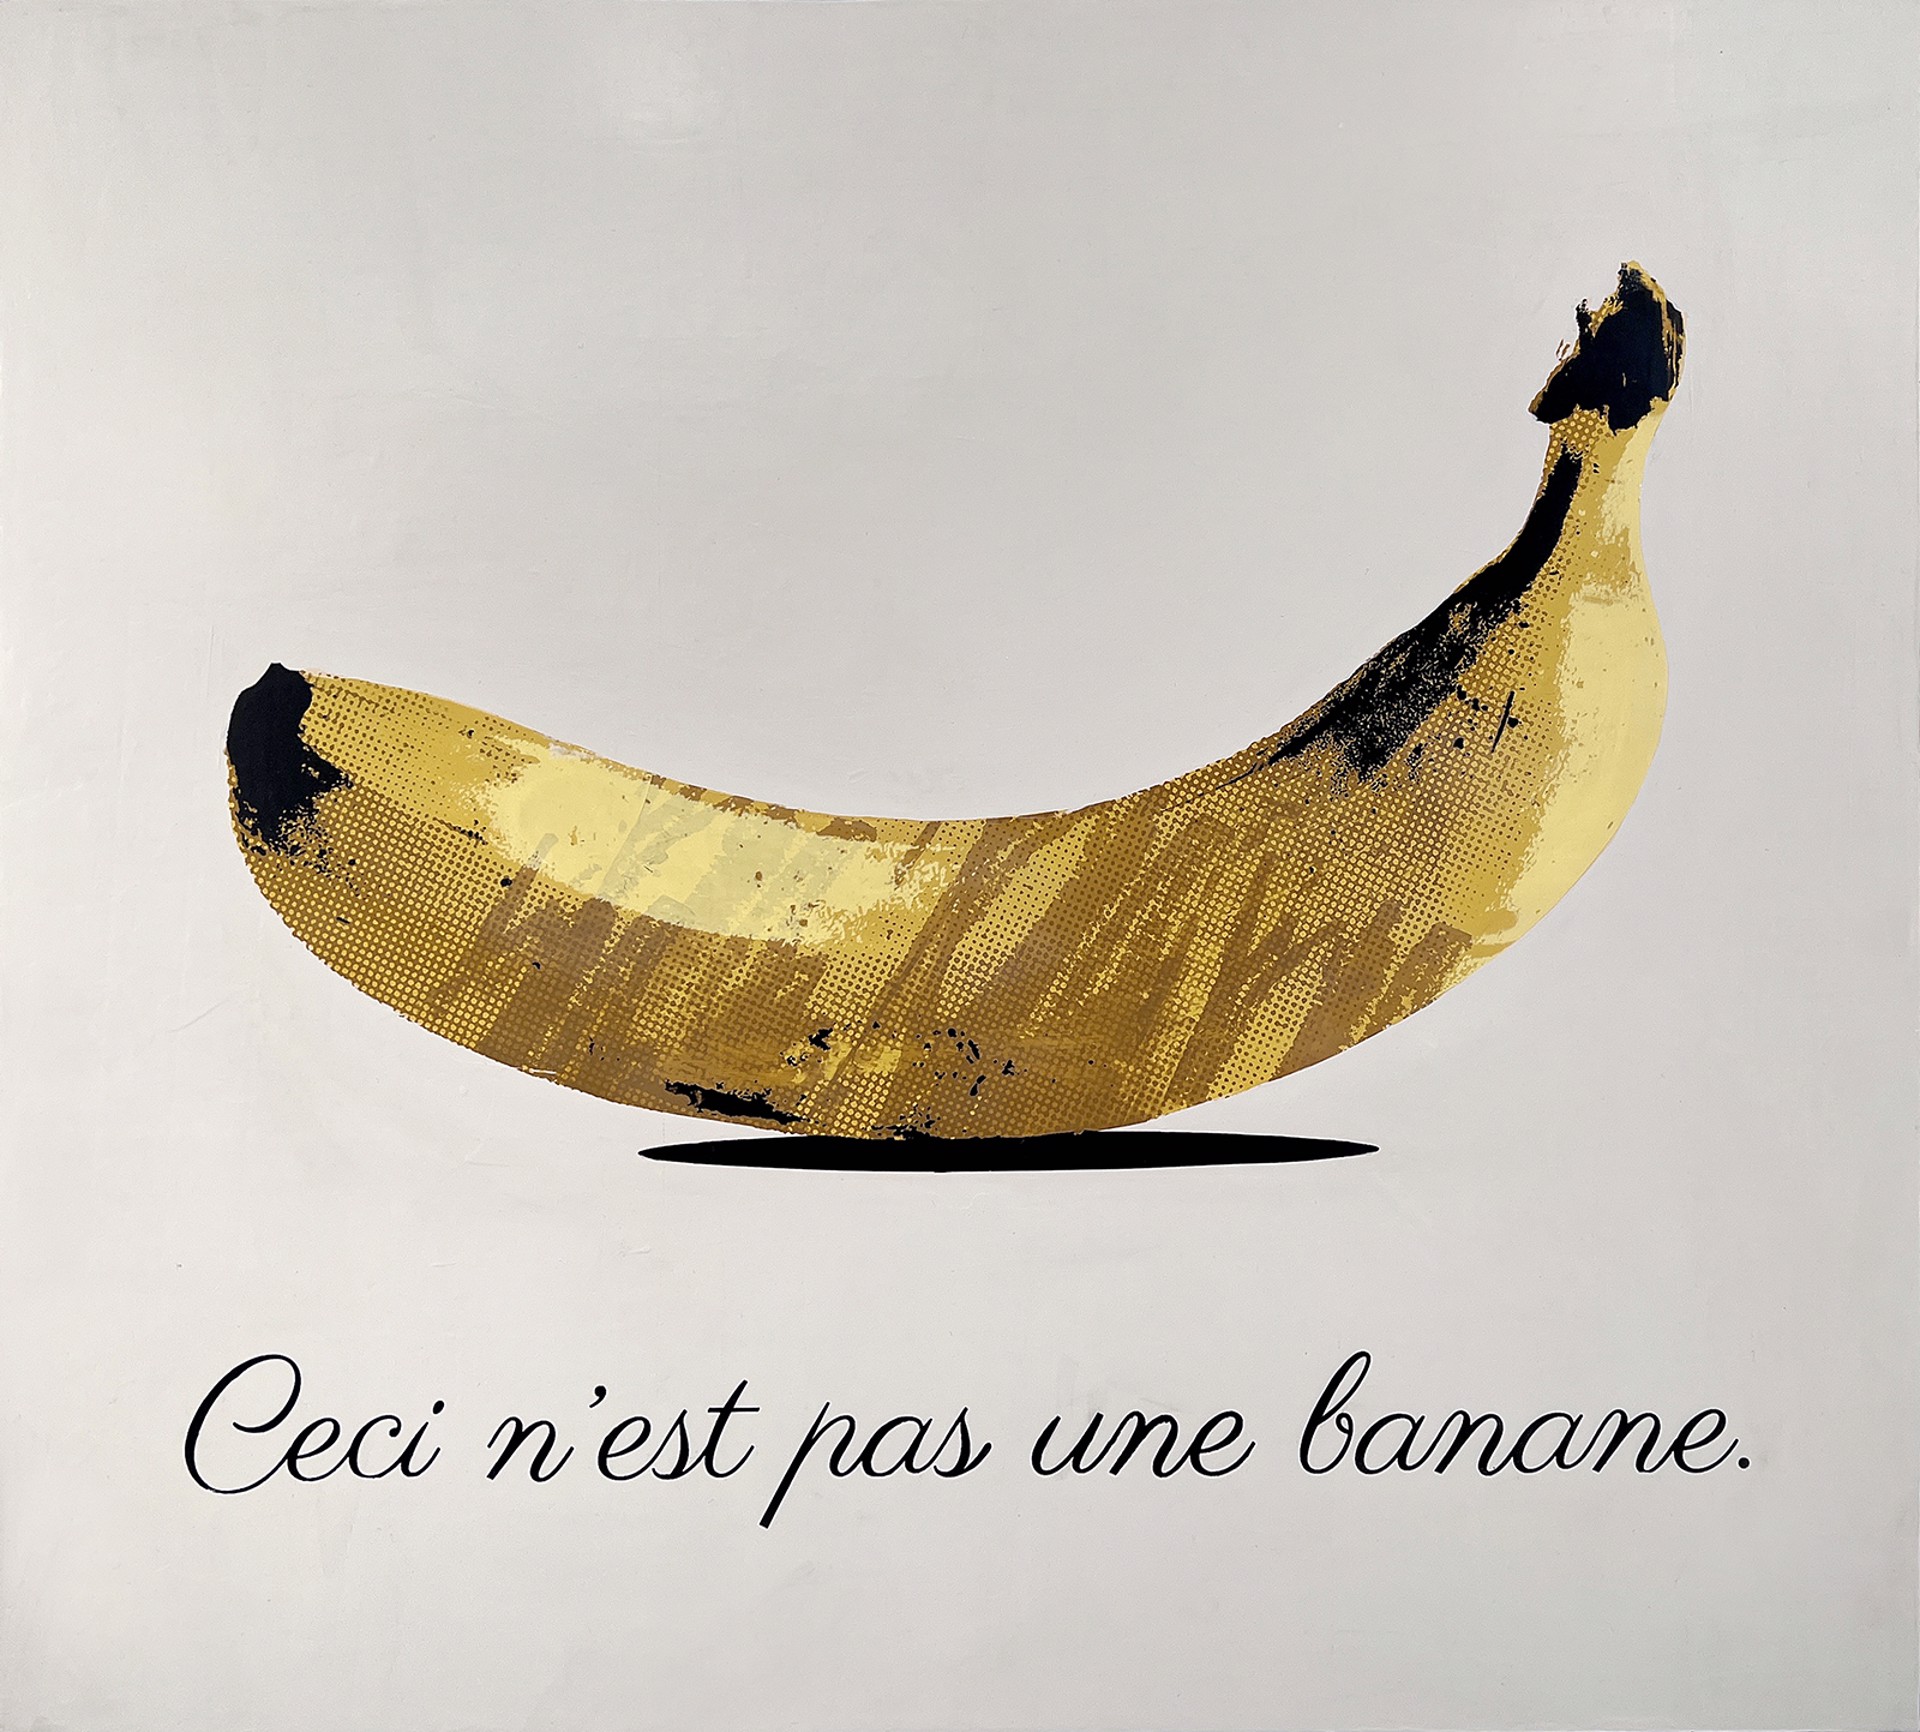 Banane by Ray Phillips